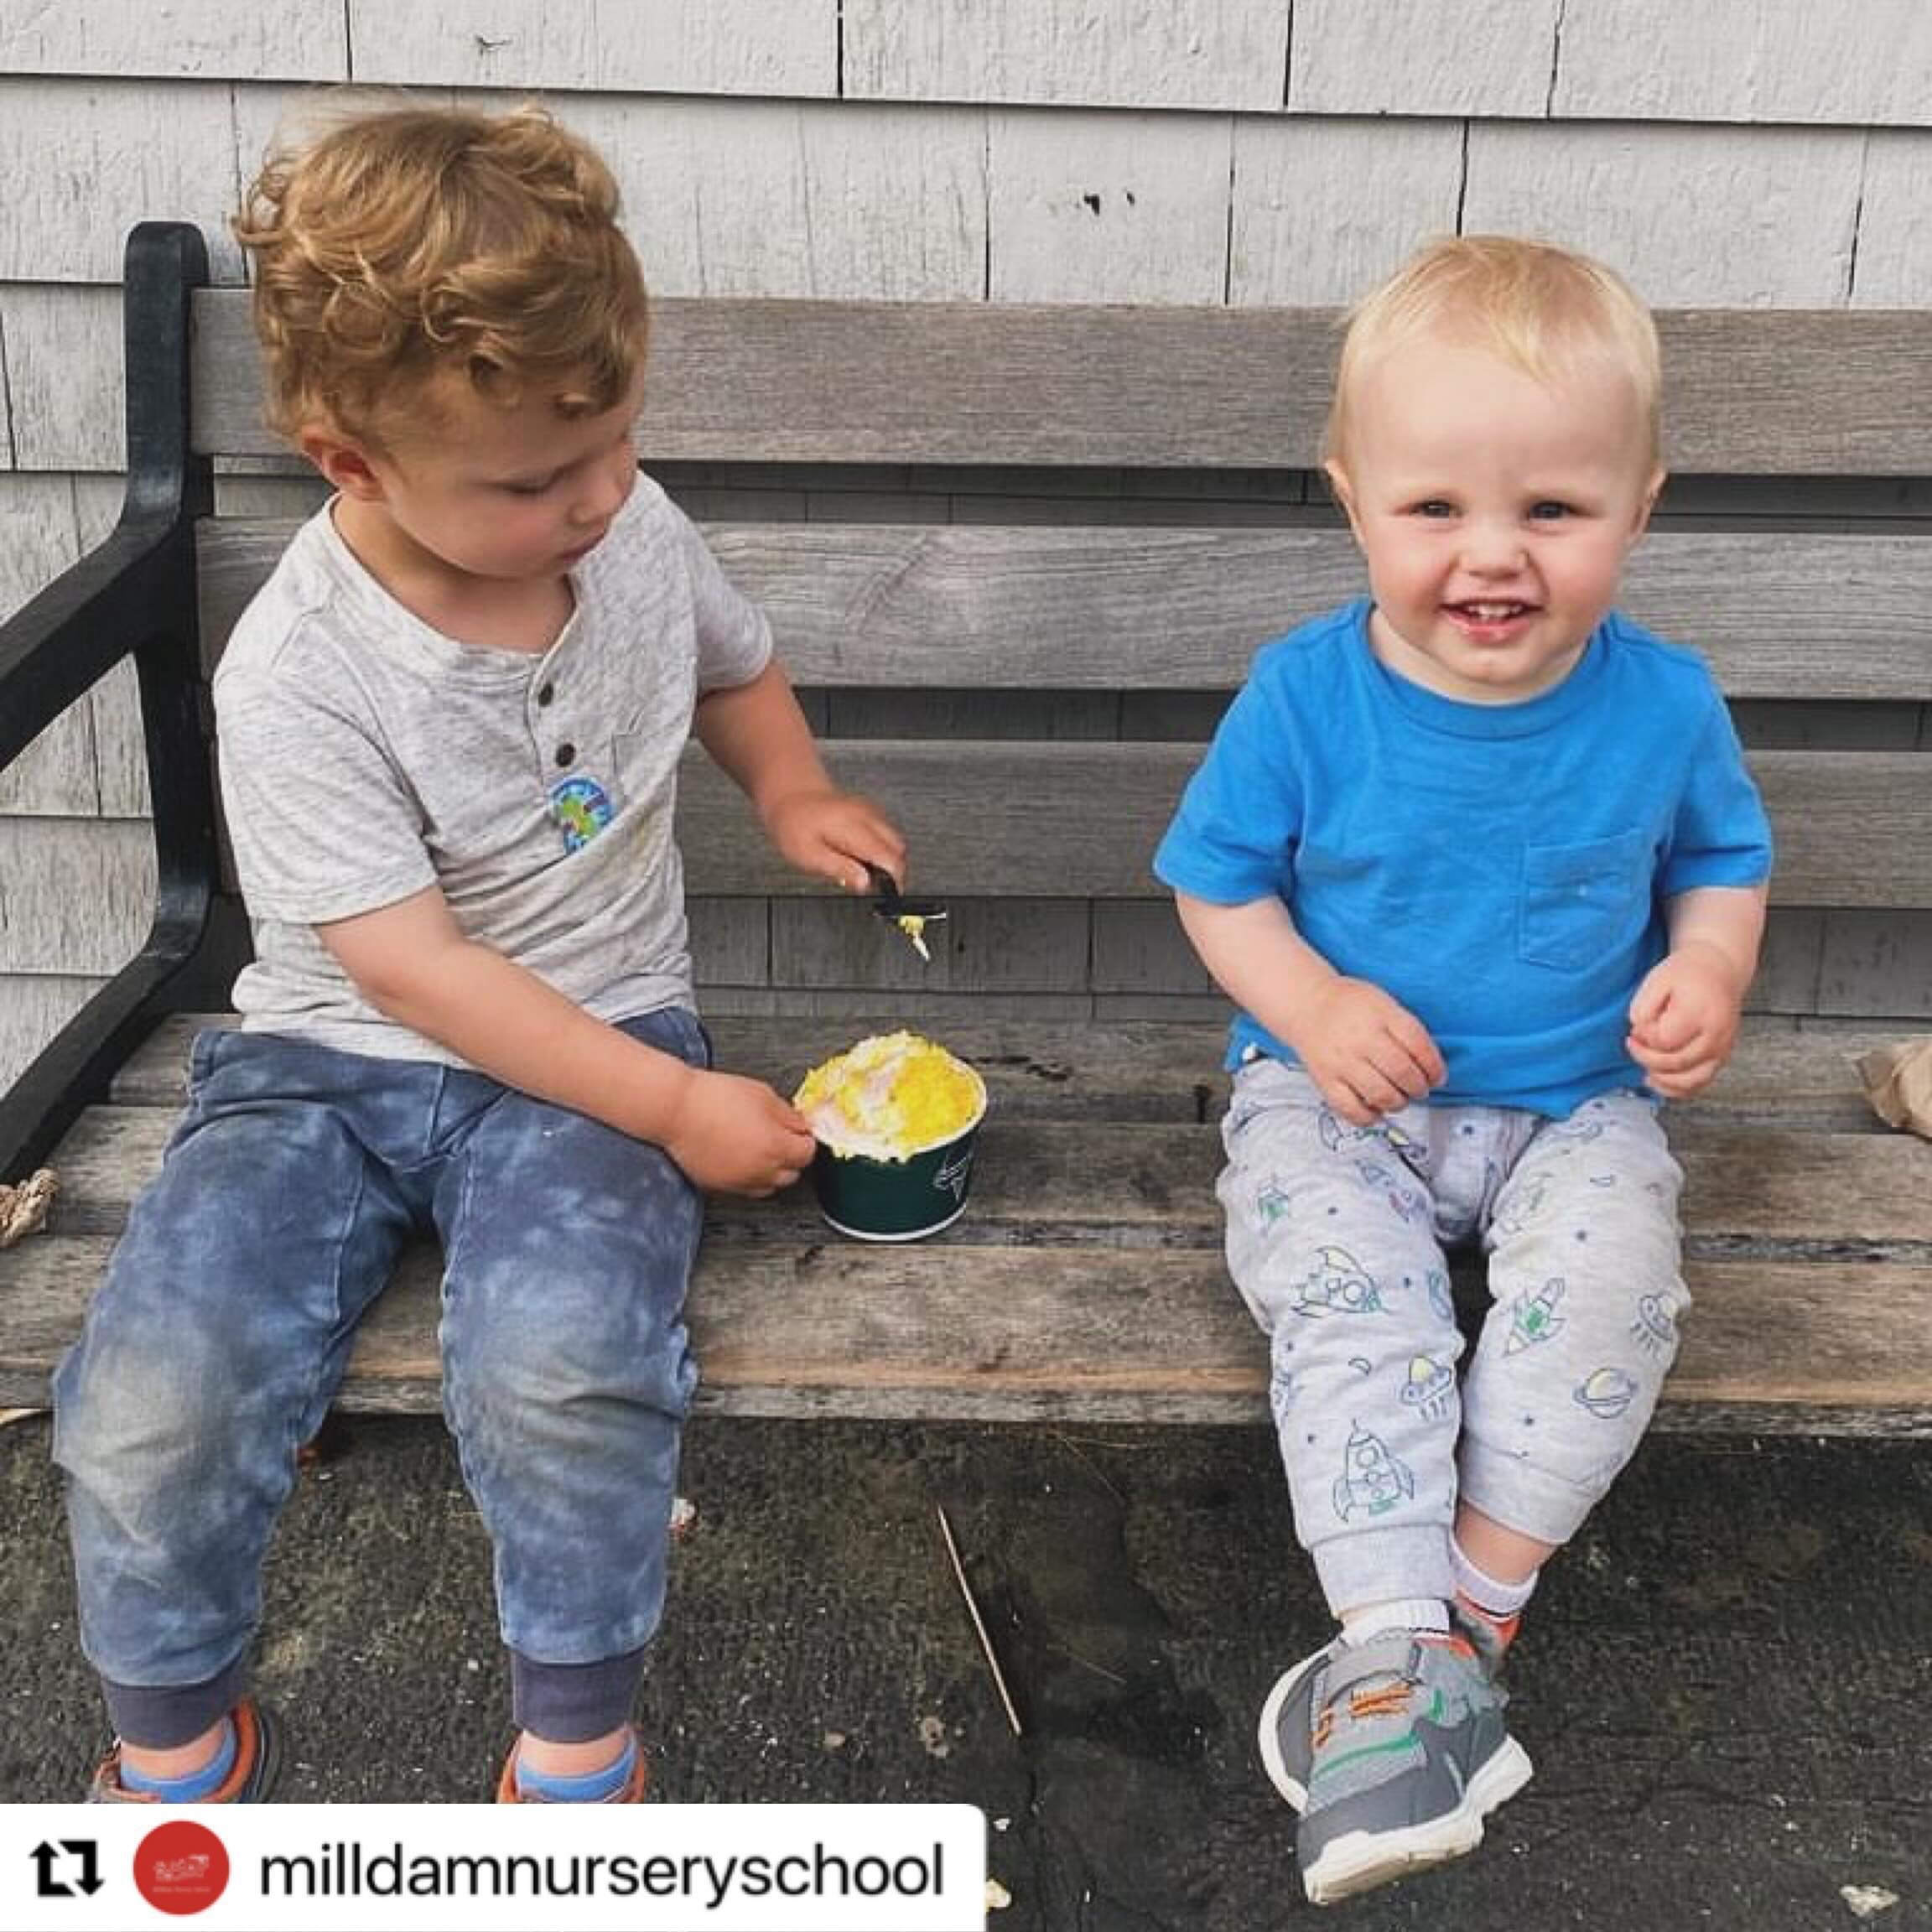 It&rsquo;s &ldquo;ducky&rdquo; sprinkle week (5/25-6/1) at our Concord shop in support of the Milldam school! Add some sunshine to your scoop, and support a great cause! 🐥💛☀️🍦

#bedfordfarms #bedfordfarmsicecream #greatdayforicecream #gdfic #ducky